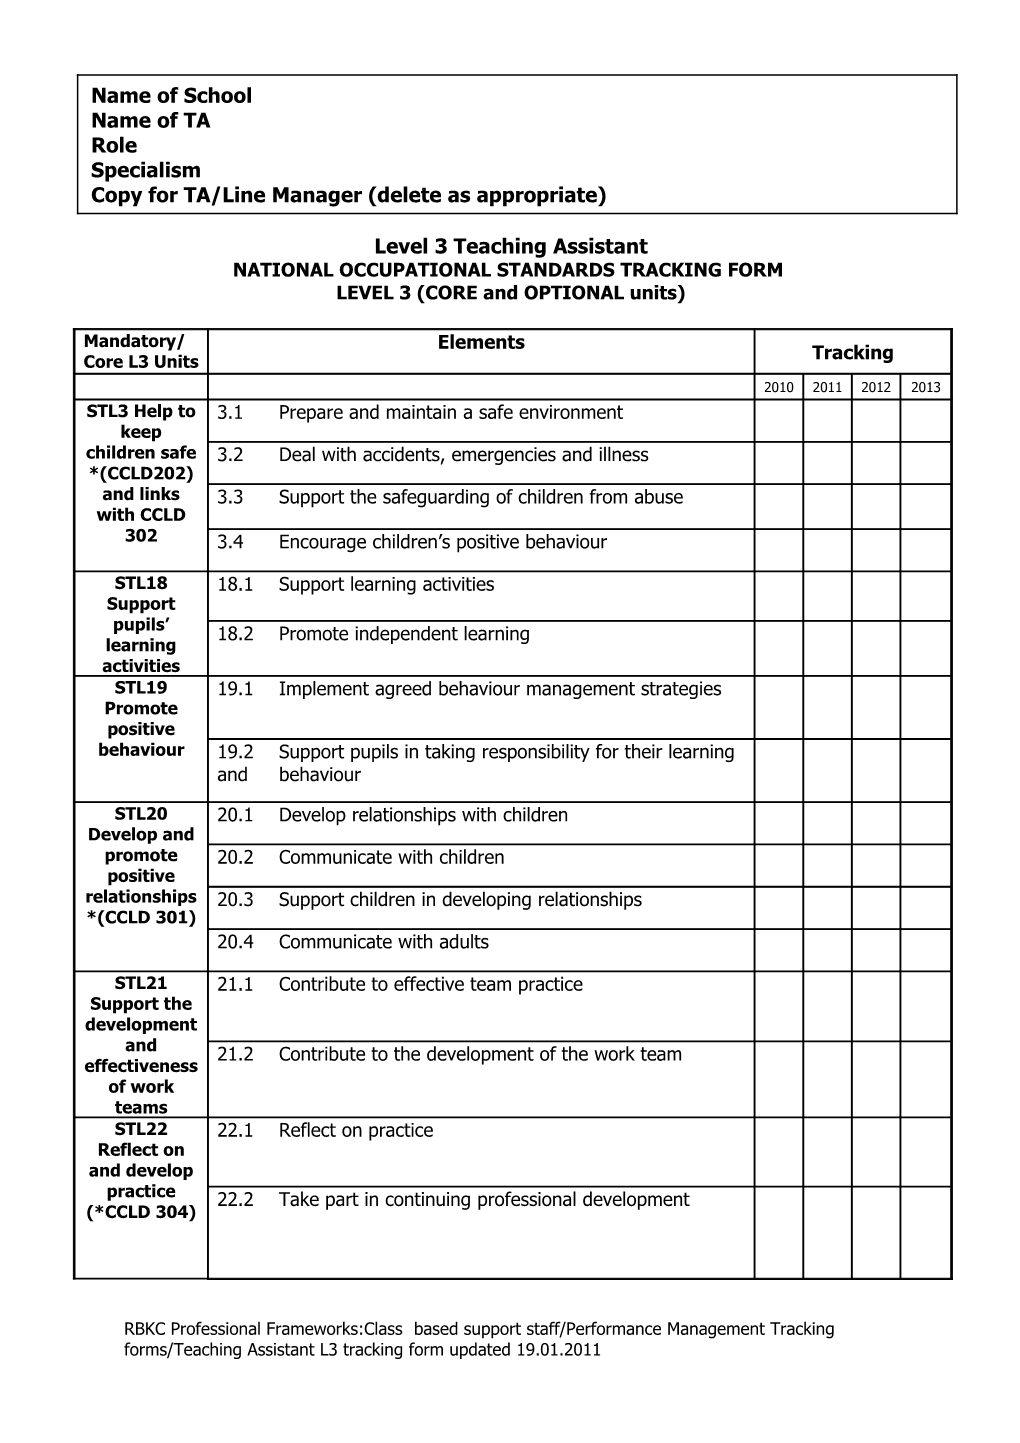 National Occupational Standards Tracking Form